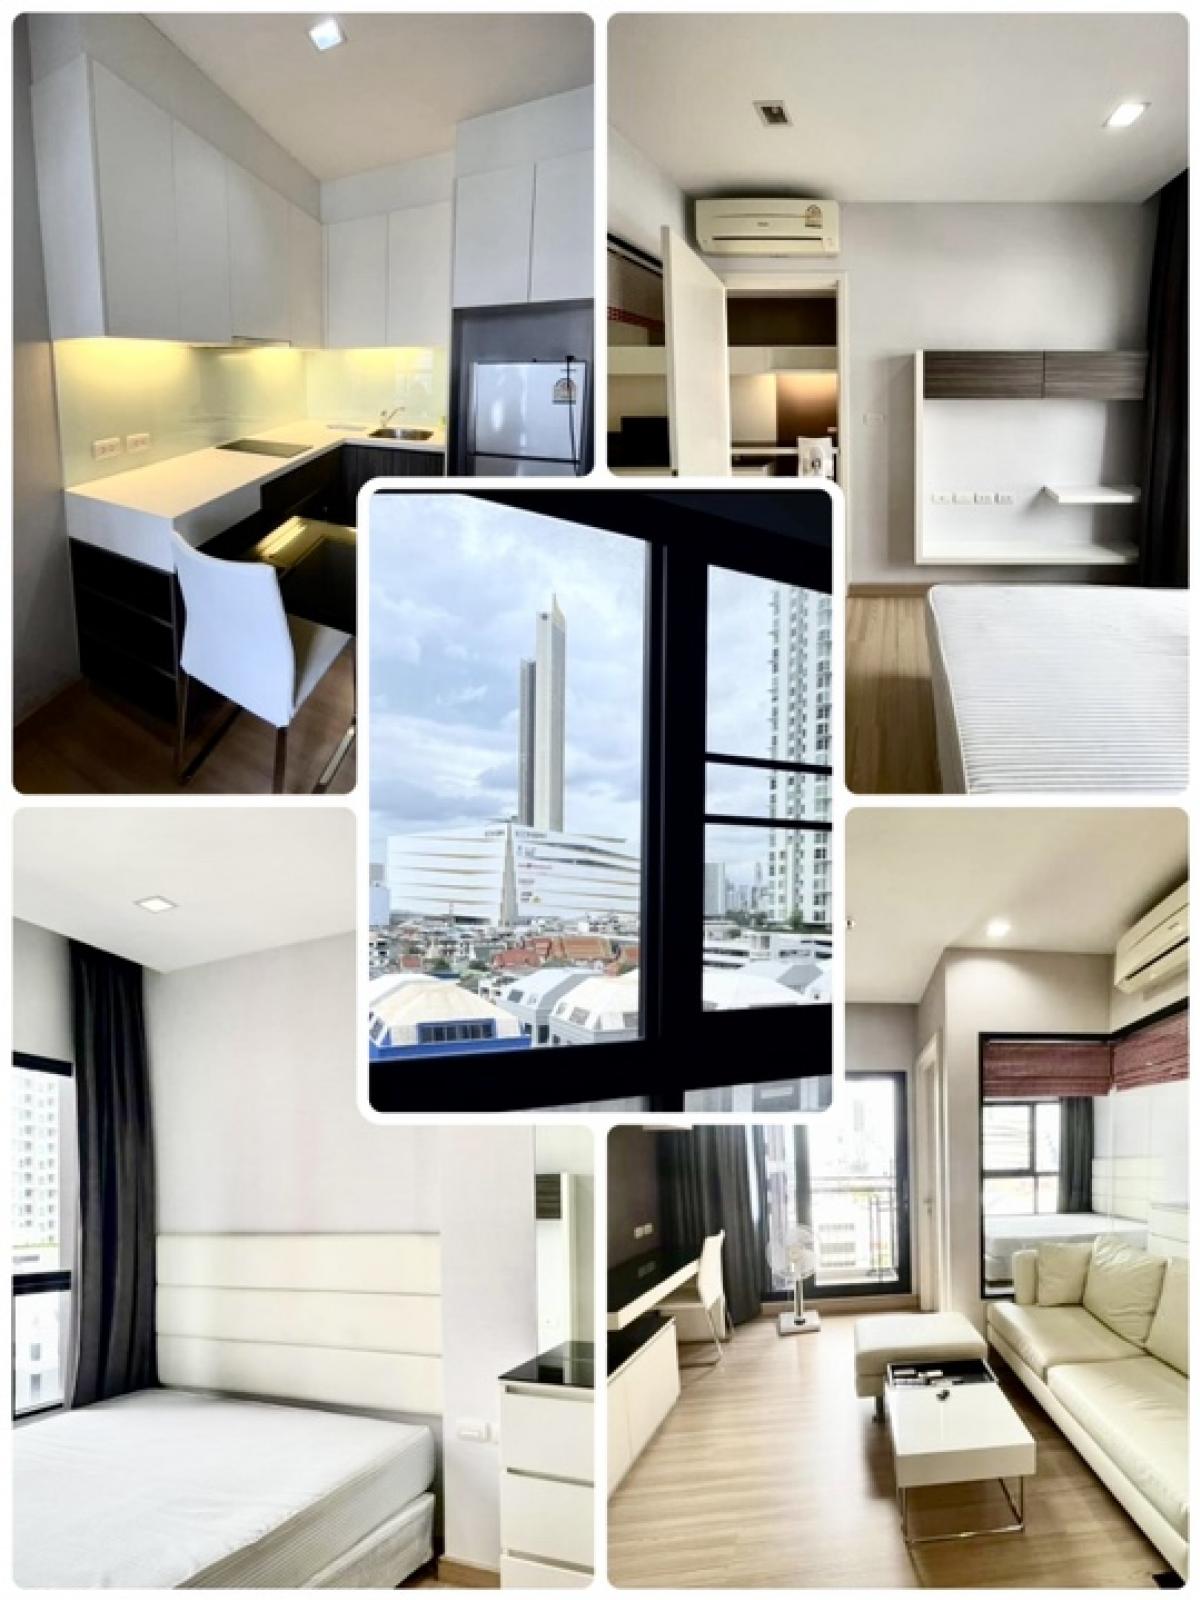 For RentCondoWongwianyai, Charoennakor : READY MOVE-IN🔥Powerful promotion Move in for 5 months 🔥🎇Beautiful view•ICON Siam🎇See beautiful fireworks•all year long 🍀URBANO Absolute Sathorn-Taksin🍀1-bed 39 sq m.❇️ 11th floor